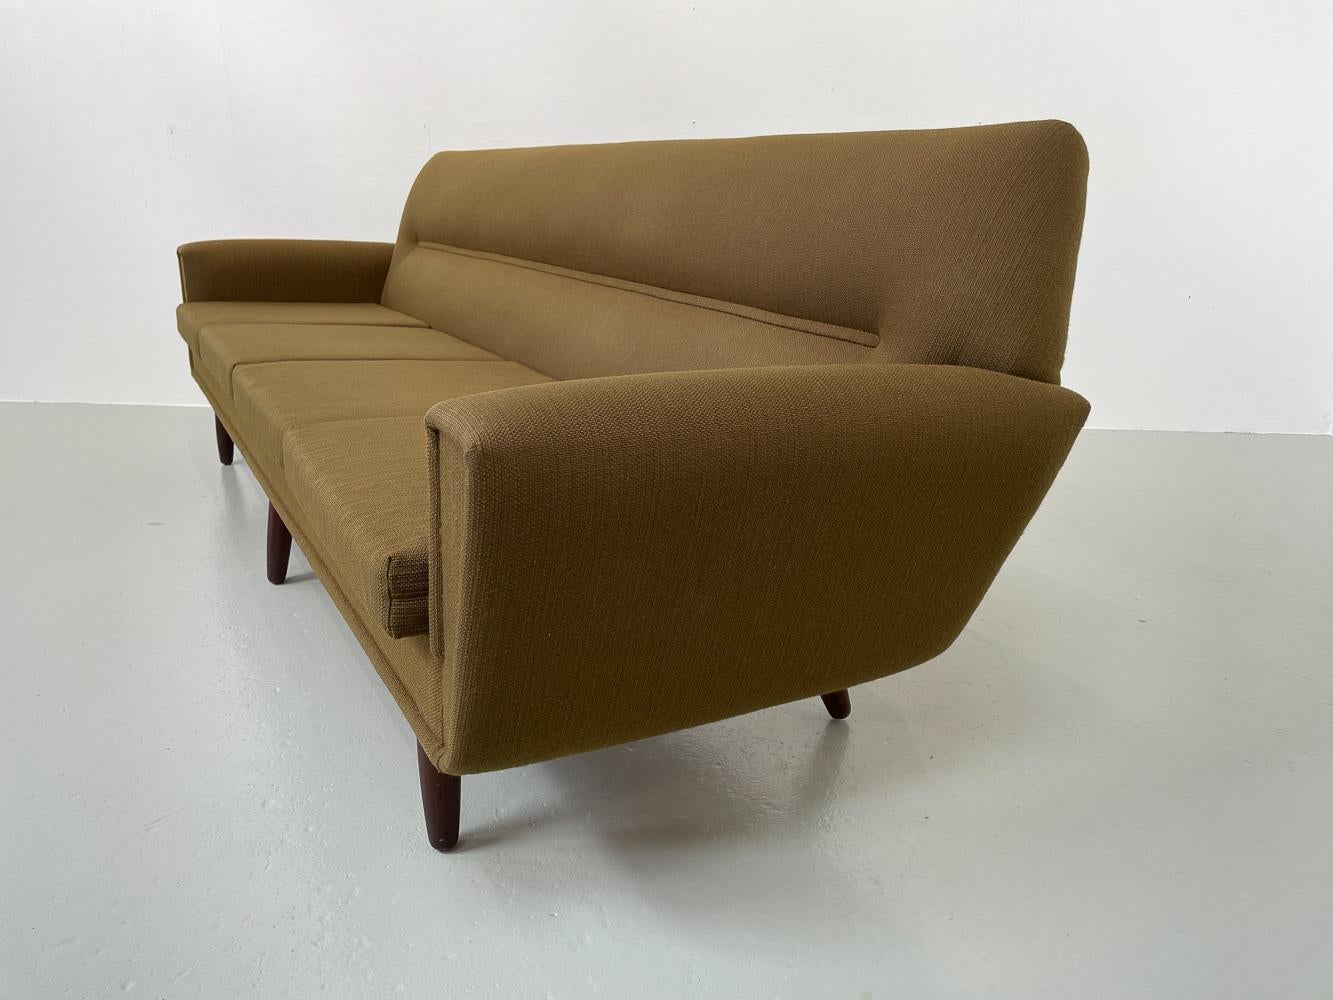 Mid-20th Century Vintage Danish Green 4-Seater Sofa in Teak and Wool, 1960s.